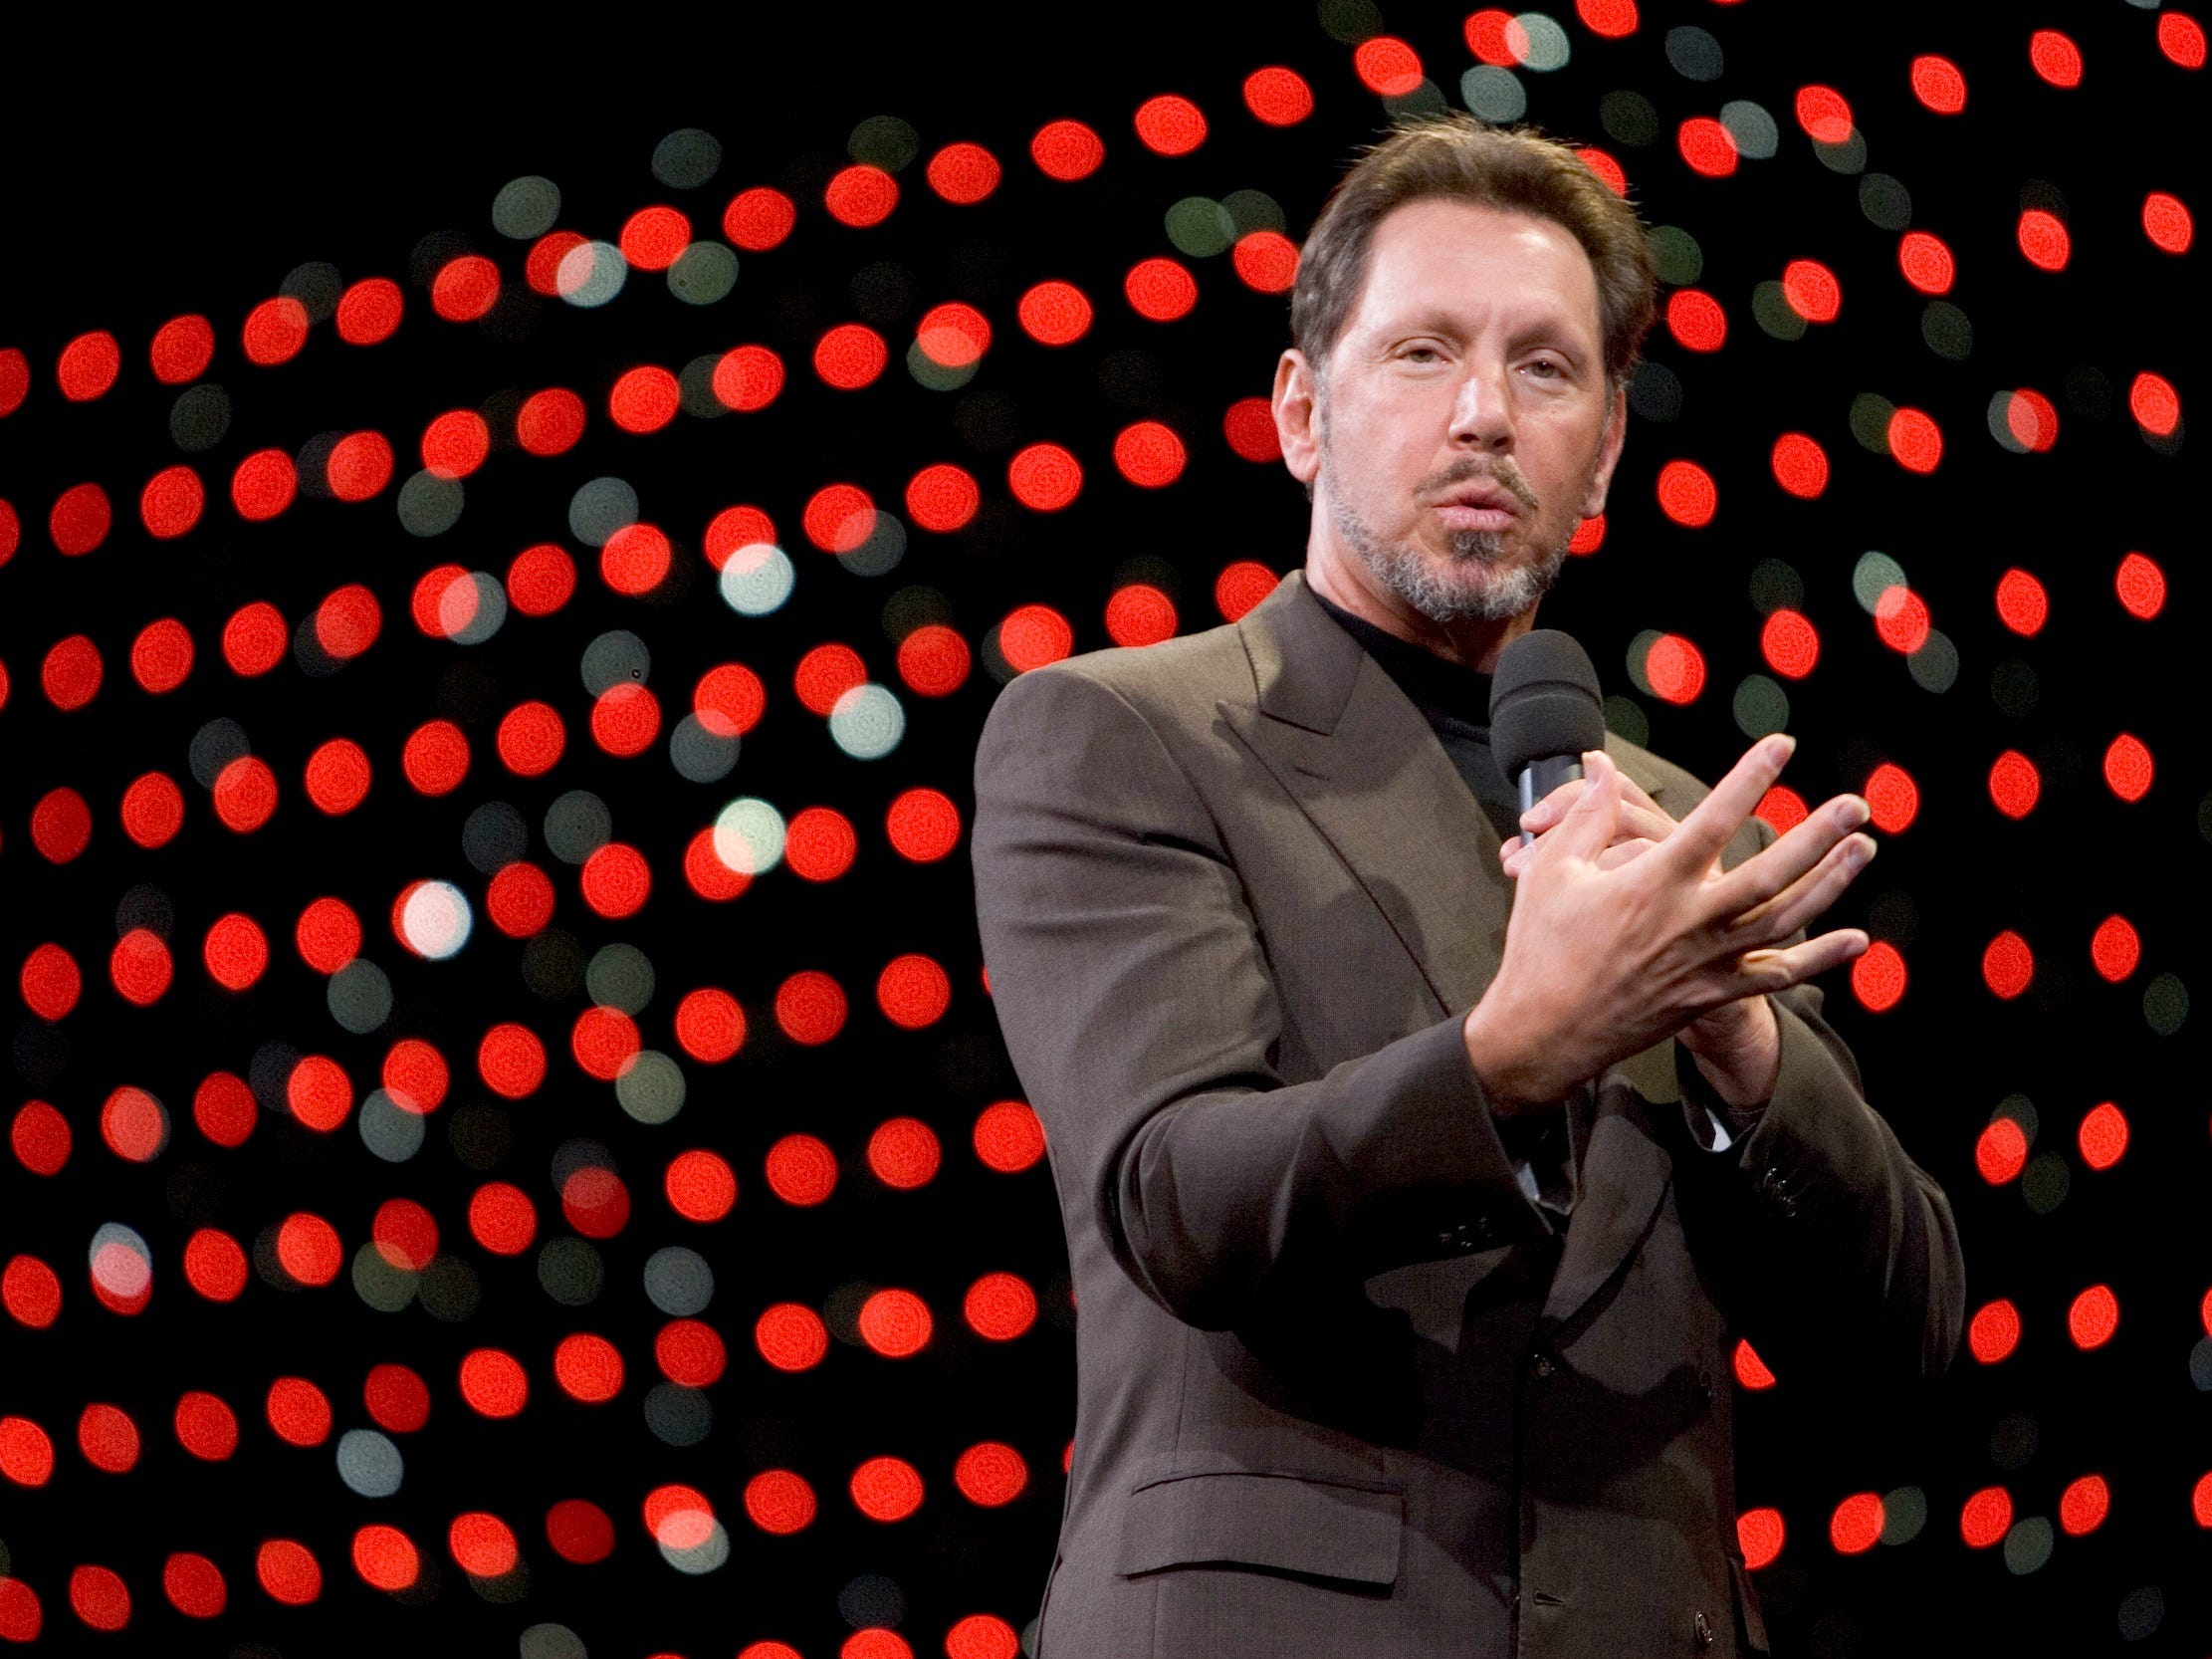 <ul class="summary-list"> <li>Larry Ellison, the 79-year-old cofounder of Oracle, is one of the most interesting men in tech.</li> <li>Whether yacht-racing, buying Hawaiian islands, or trash-talking competitors, he keeps it lively.</li> <li><strong>N</strong><strong>ow, he's one of the world's richest people with a net worth of $146 billion. </strong></li> </ul><p>Larry Ellison is the founder and chief technology officer at software company Oracle. He's also one of the world's richest men who owns nearly an entire Hawaiian island and never finished college.</p><p>The 79-year-old started his first software company in 1977, and decades later he's still one of the top dogs in Silicon Valley despite living in Hawaii full time. He's among the top five richest people in the world, according to Forbes.</p><p>Ellison has been a major investor in Tesla, Salesforce, and even reportedly had a seat on Apple's board of directors for a while.</p><p>Outside of the office, the billionaire boasts an impressive watch collection and indulges in hobbies like yacht racing.</p><p>Here's a look at the life and career of Ellison so far.</p><div class="read-original">Read the original article on <a href="https://www.businessinsider.com/larry-ellison">Business Insider</a></div>